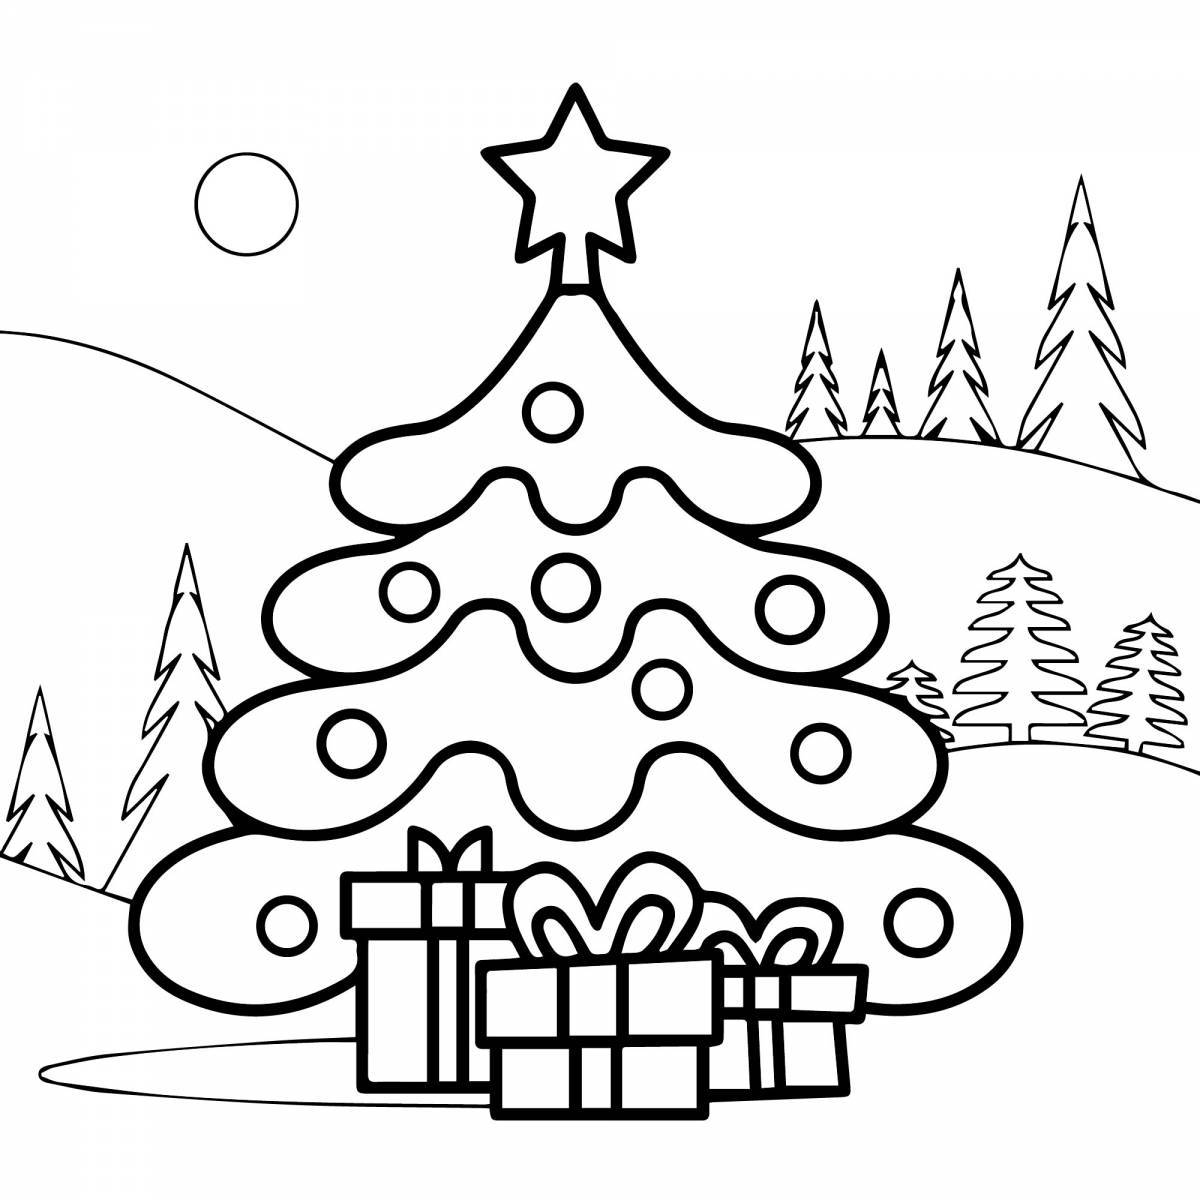 Exquisite Christmas tree coloring book for 3-4 year olds